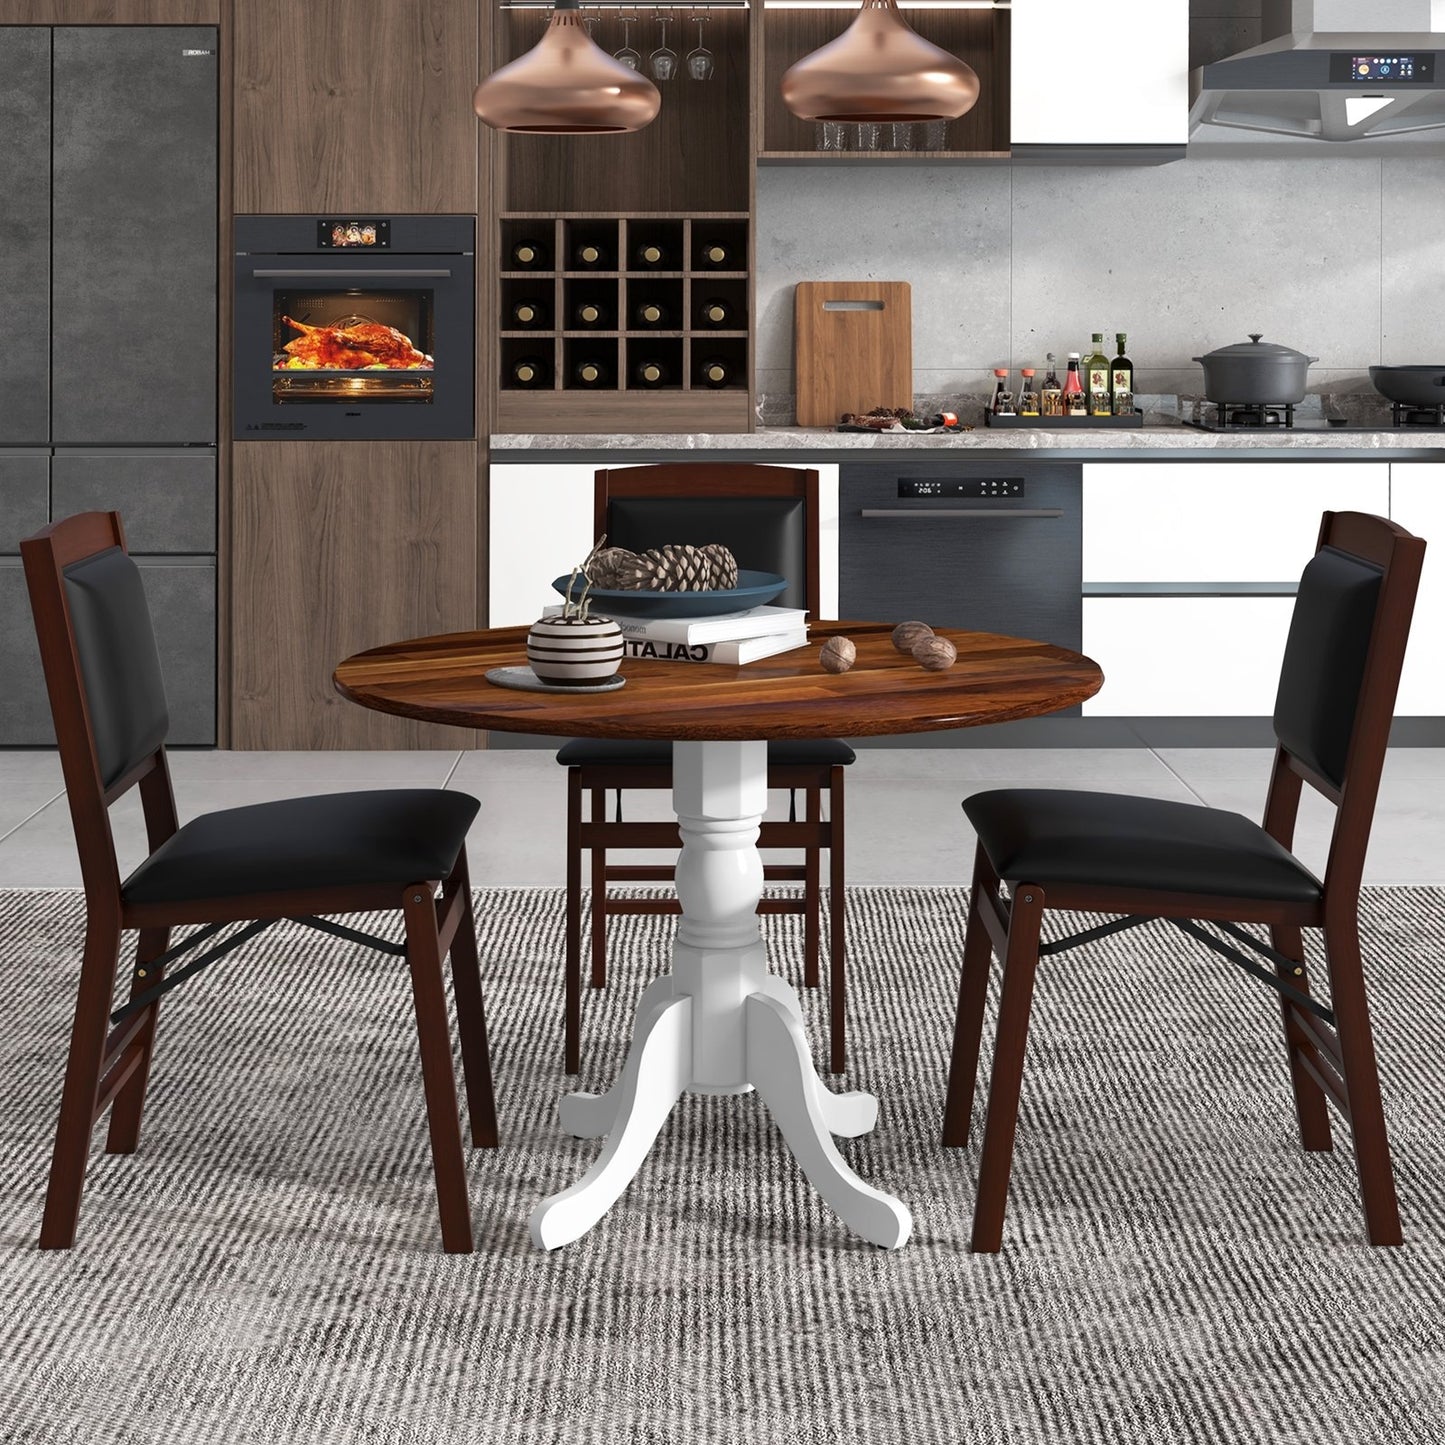 Wooden Dining Table with Round Tabletop and Curved Trestle Legs, Walnut & White